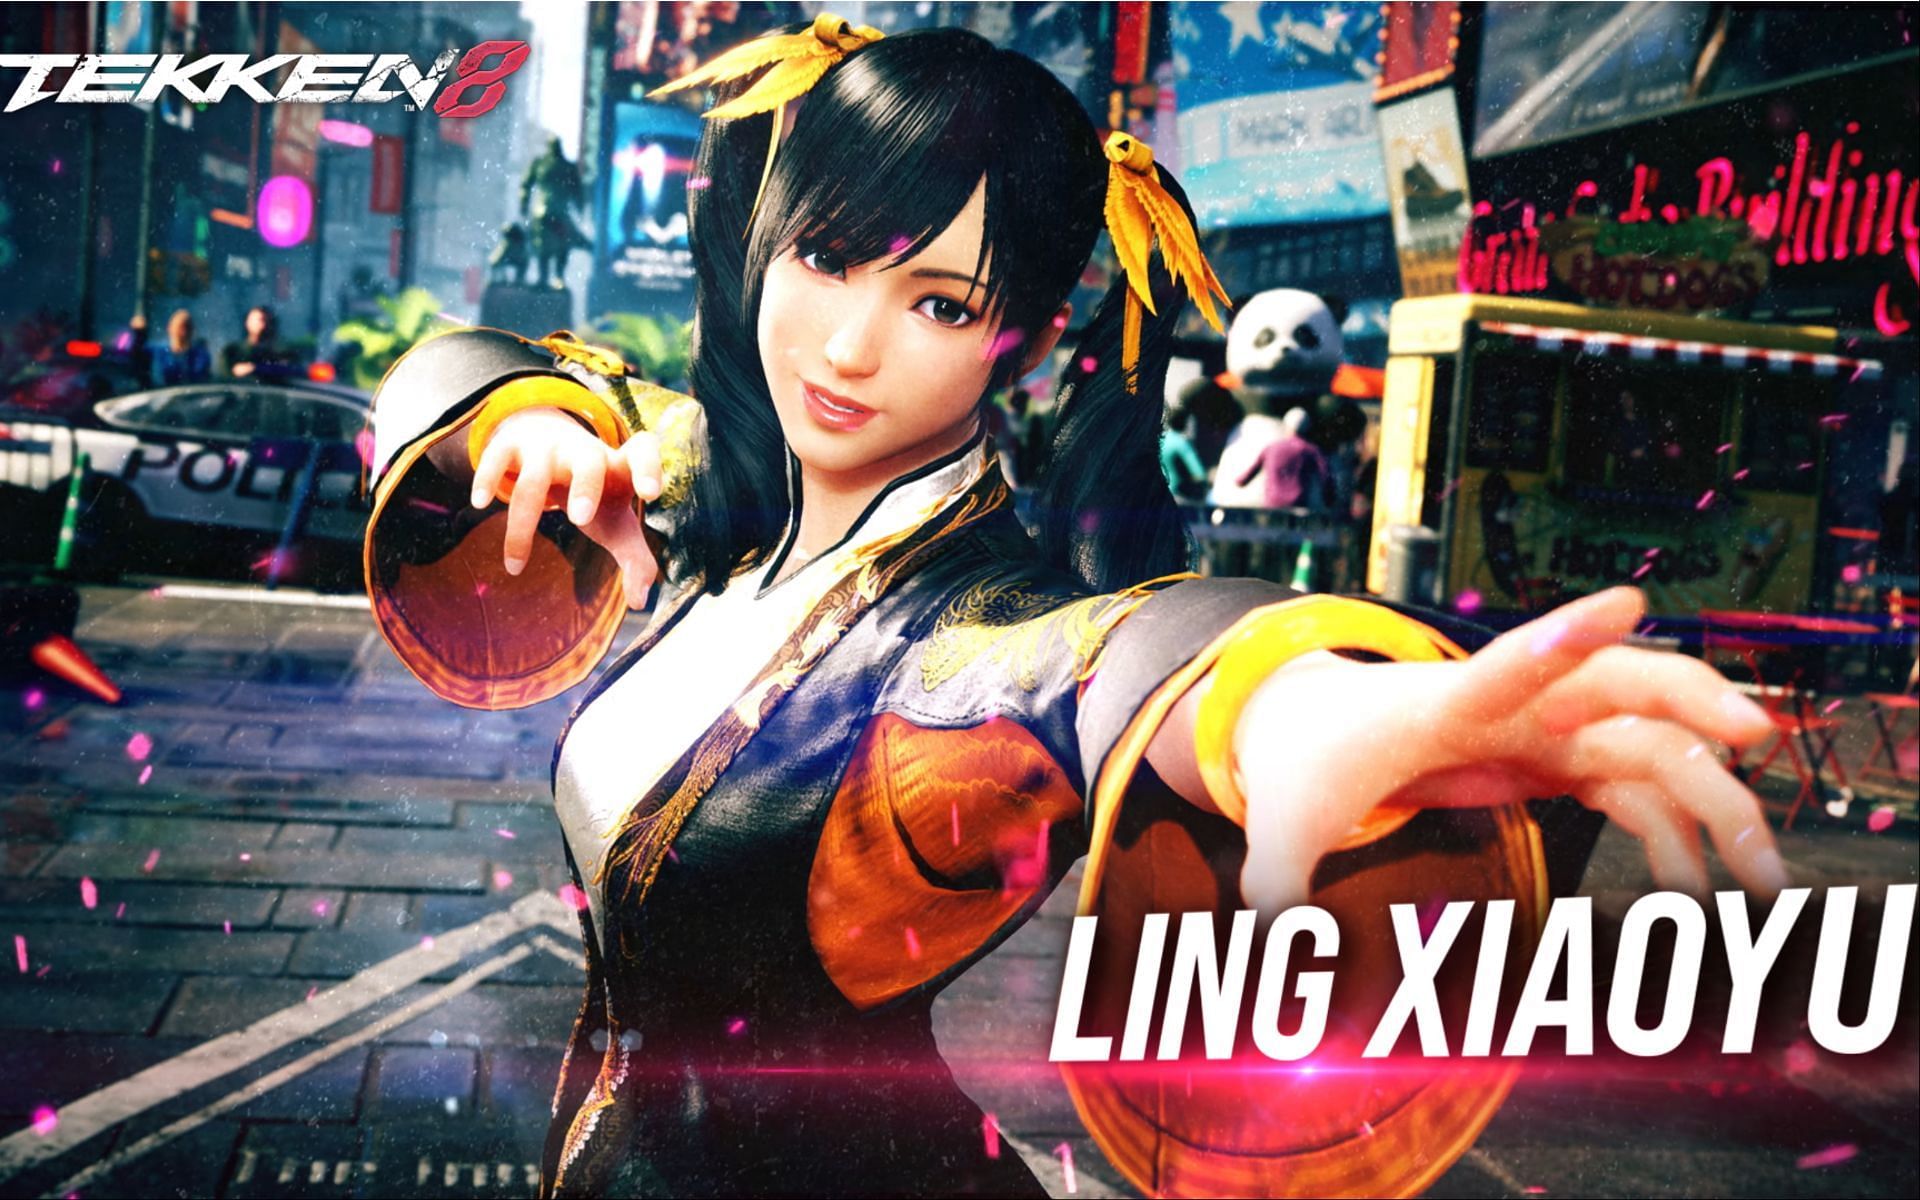 Ling Xiaoyu gets the first official look in brand new Tekken 8 trailer (Image via Bandai Namco)